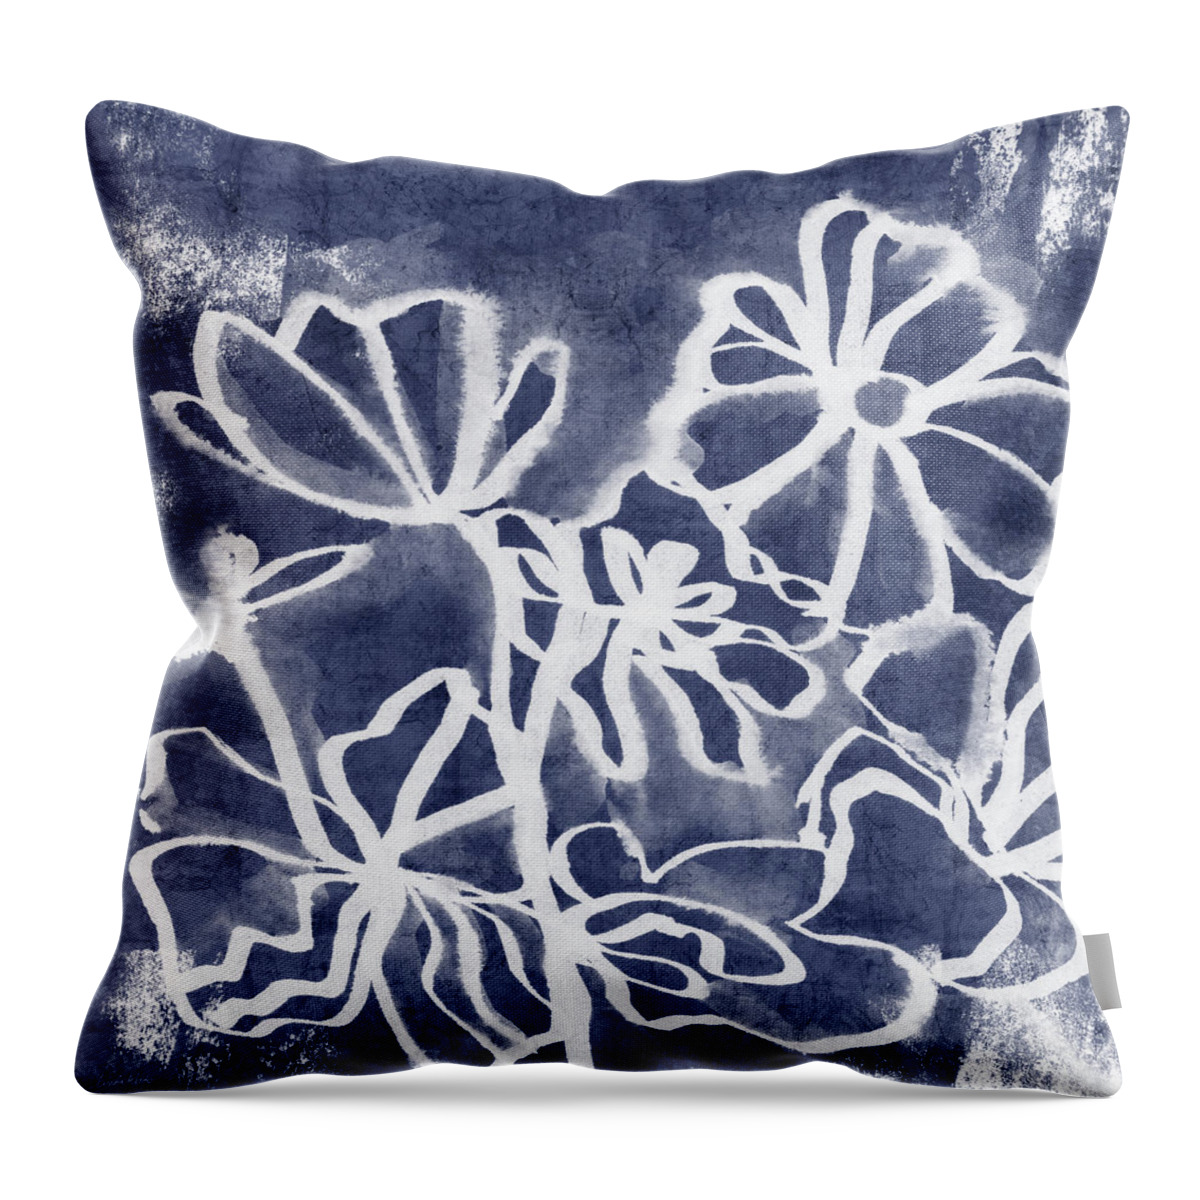 Indigo Throw Pillow featuring the painting Indigo Floral 3- Art by Linda Woods by Linda Woods